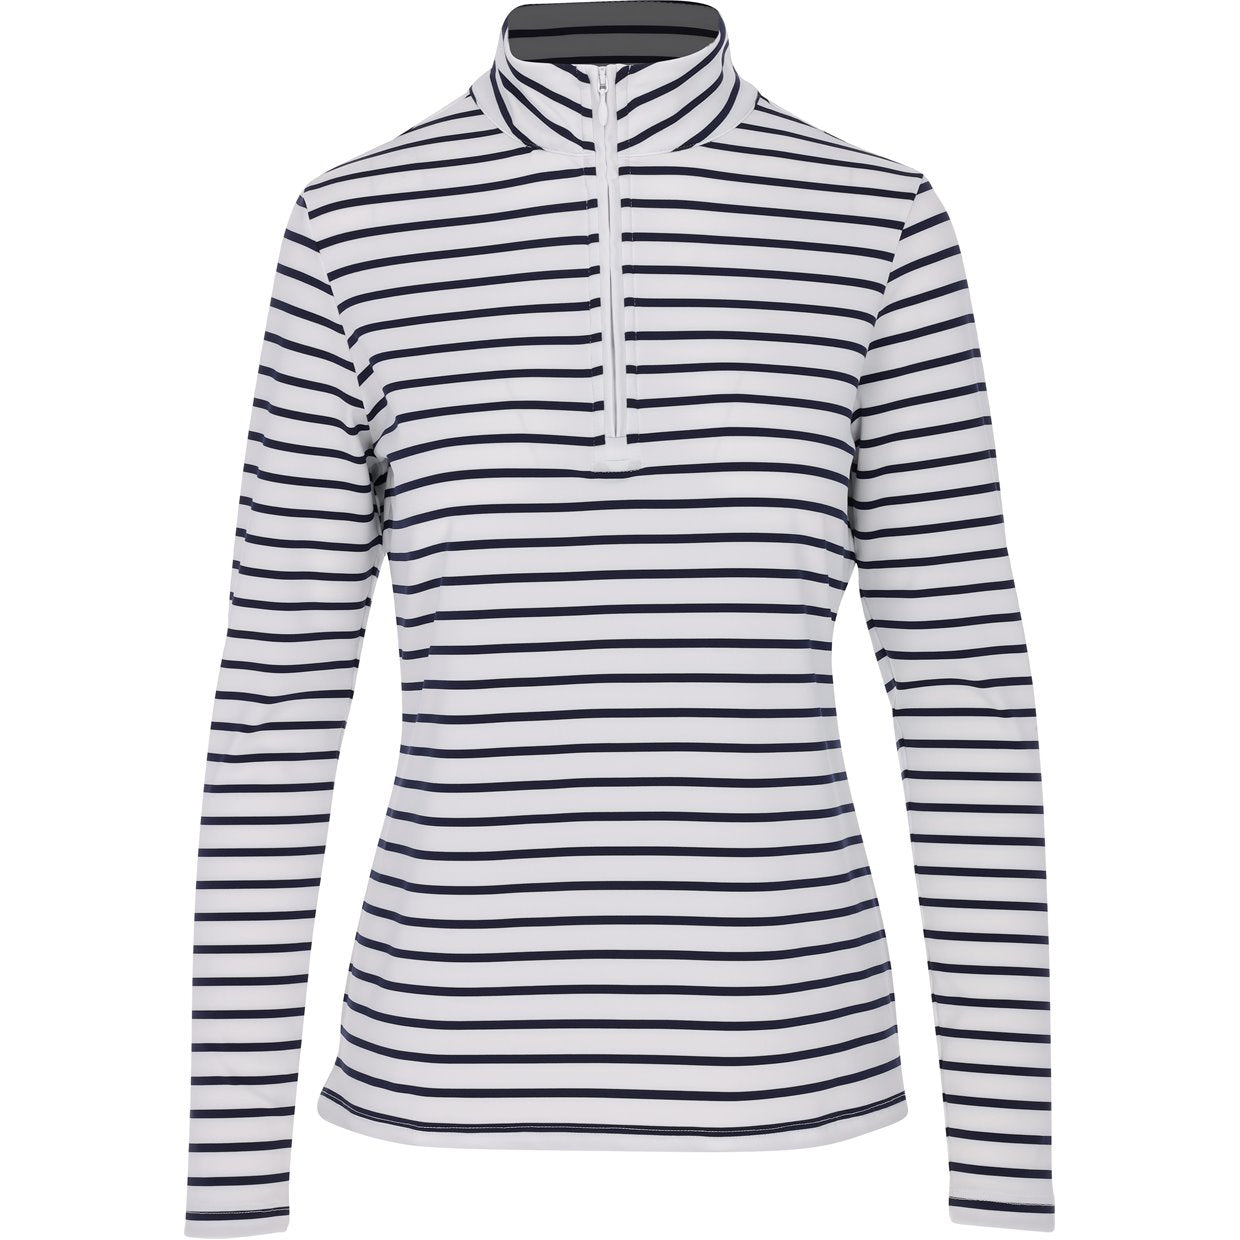 Spring forward with this striped quarter-zip from Renwick